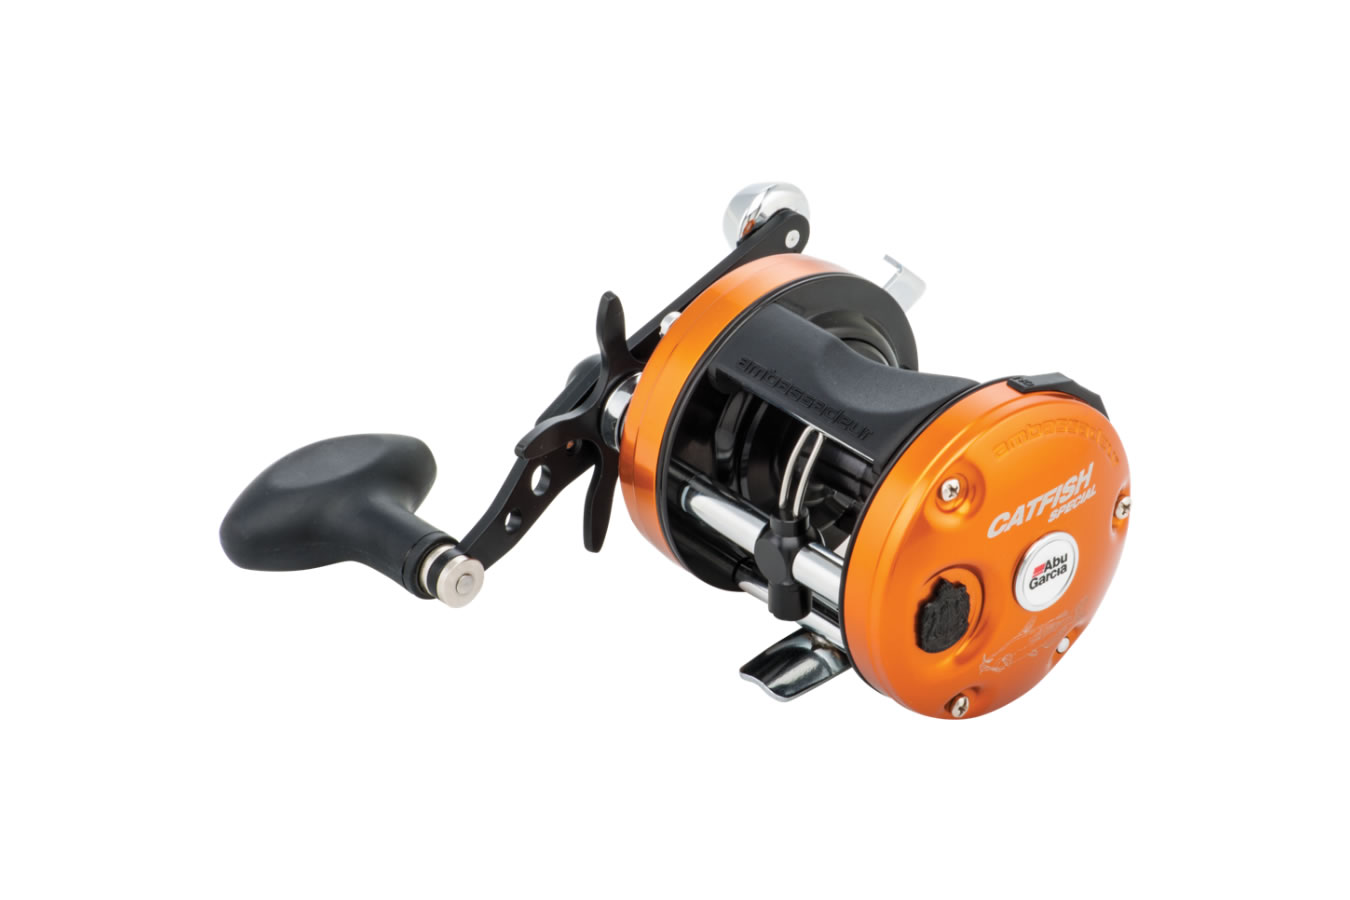 Discount Abu Garcia C3-7000 Catfish Special Round Baitcasting Reel - 4.1:1  for Sale, Online Fishing Reels Store